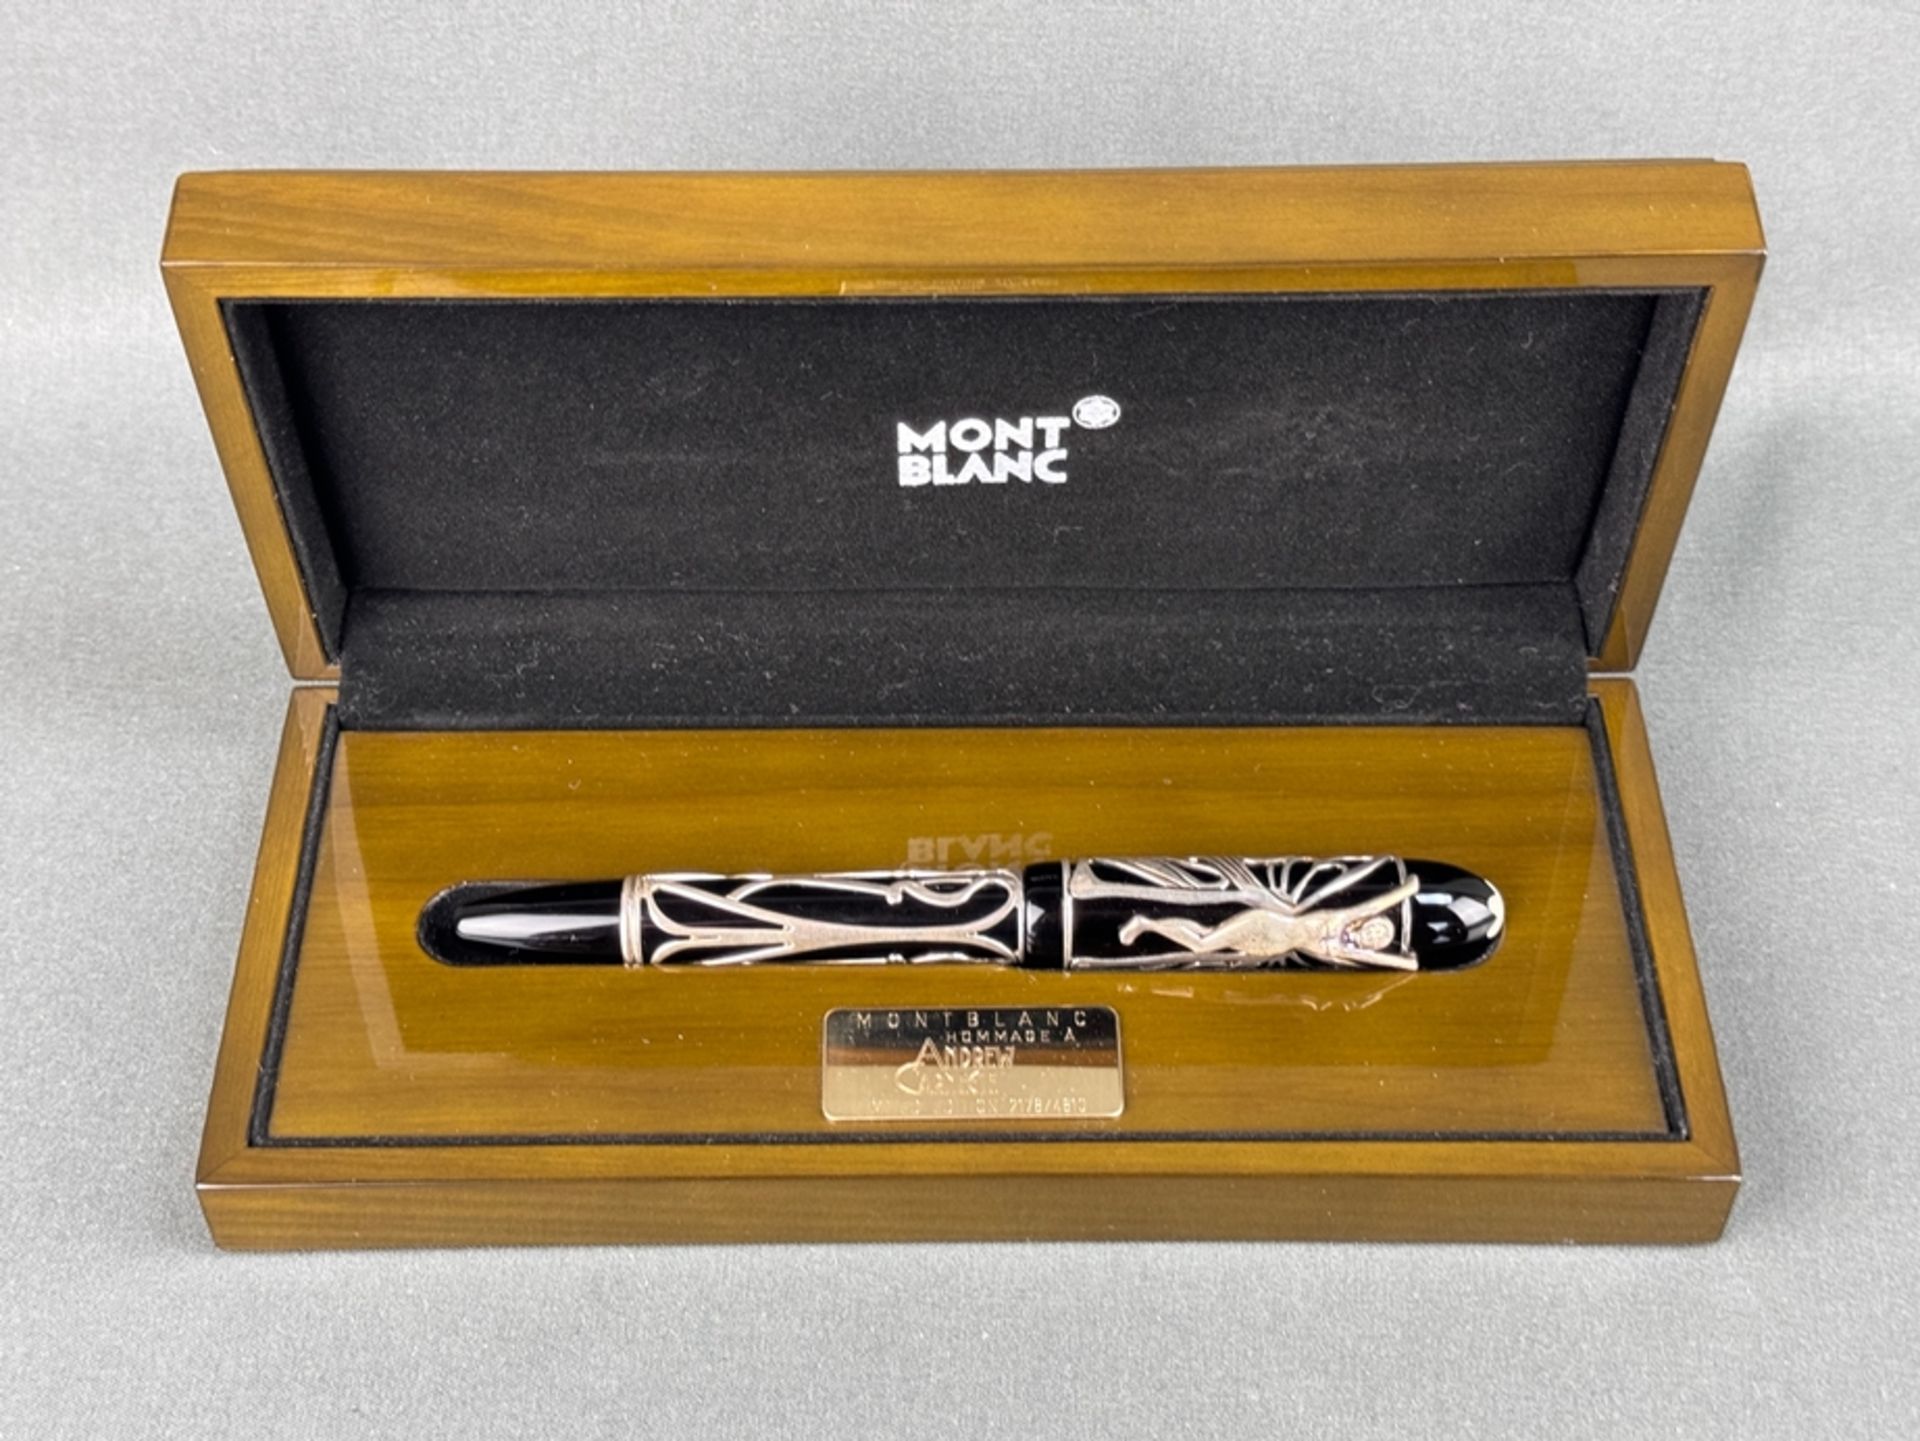 Montblanc fountain pen "Andrew Carnegie", limited edition 2178/4810, piston fountain pen with 750/1